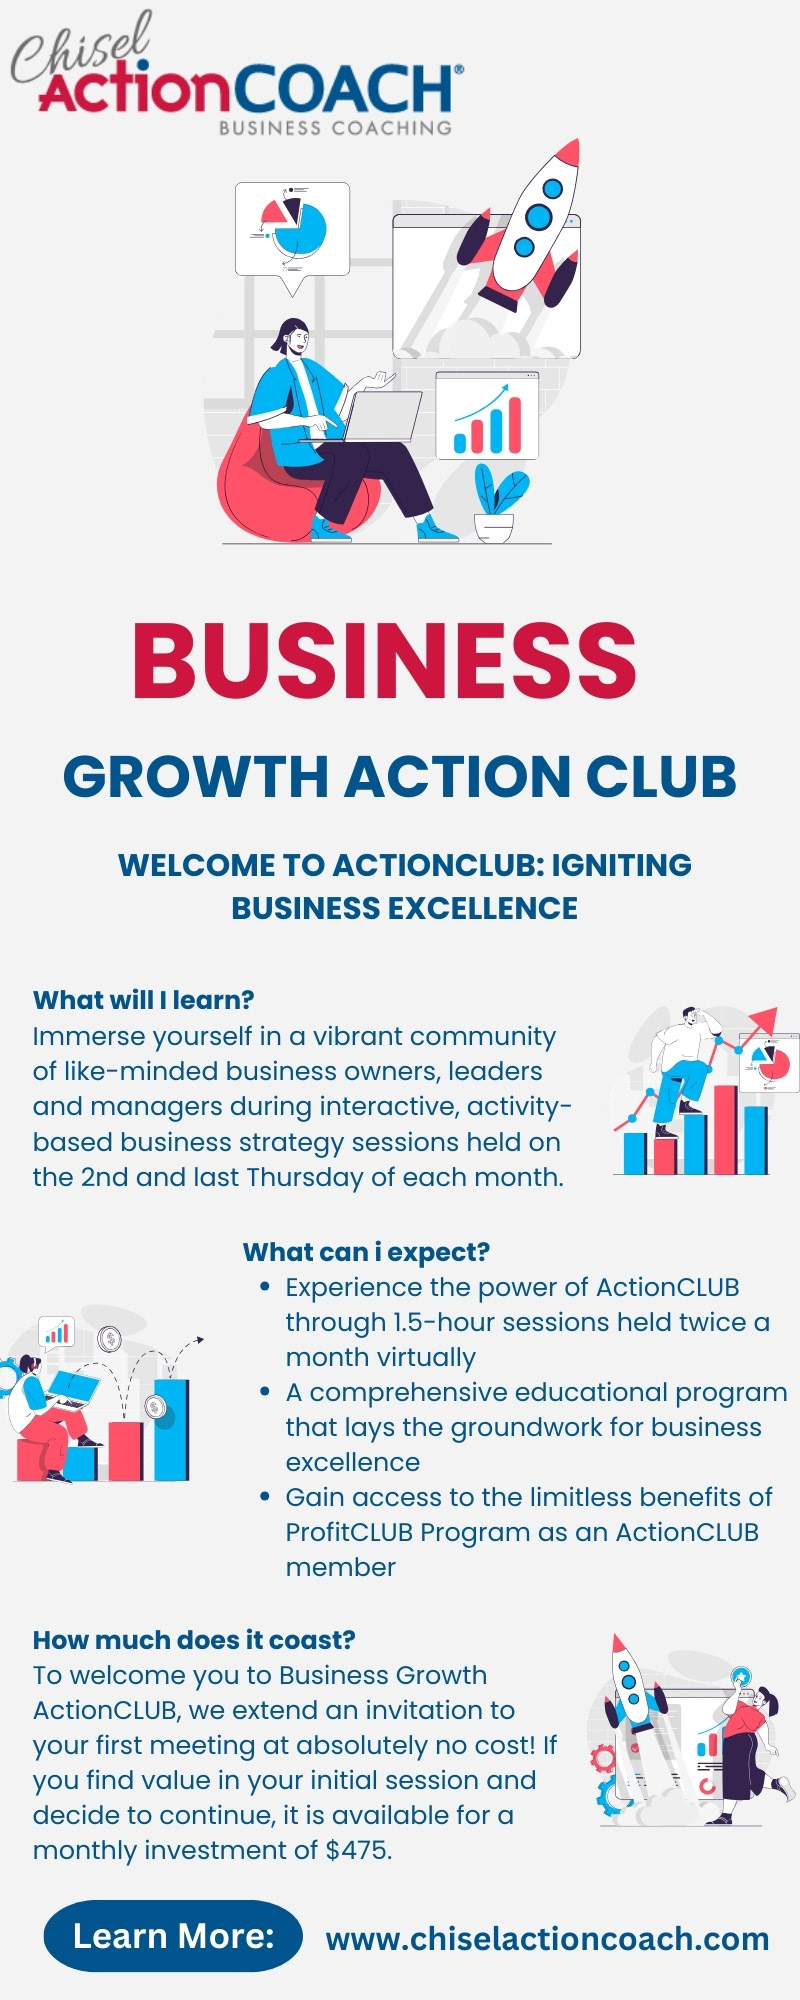 Business Growth Action Club | Chisel Action Coach